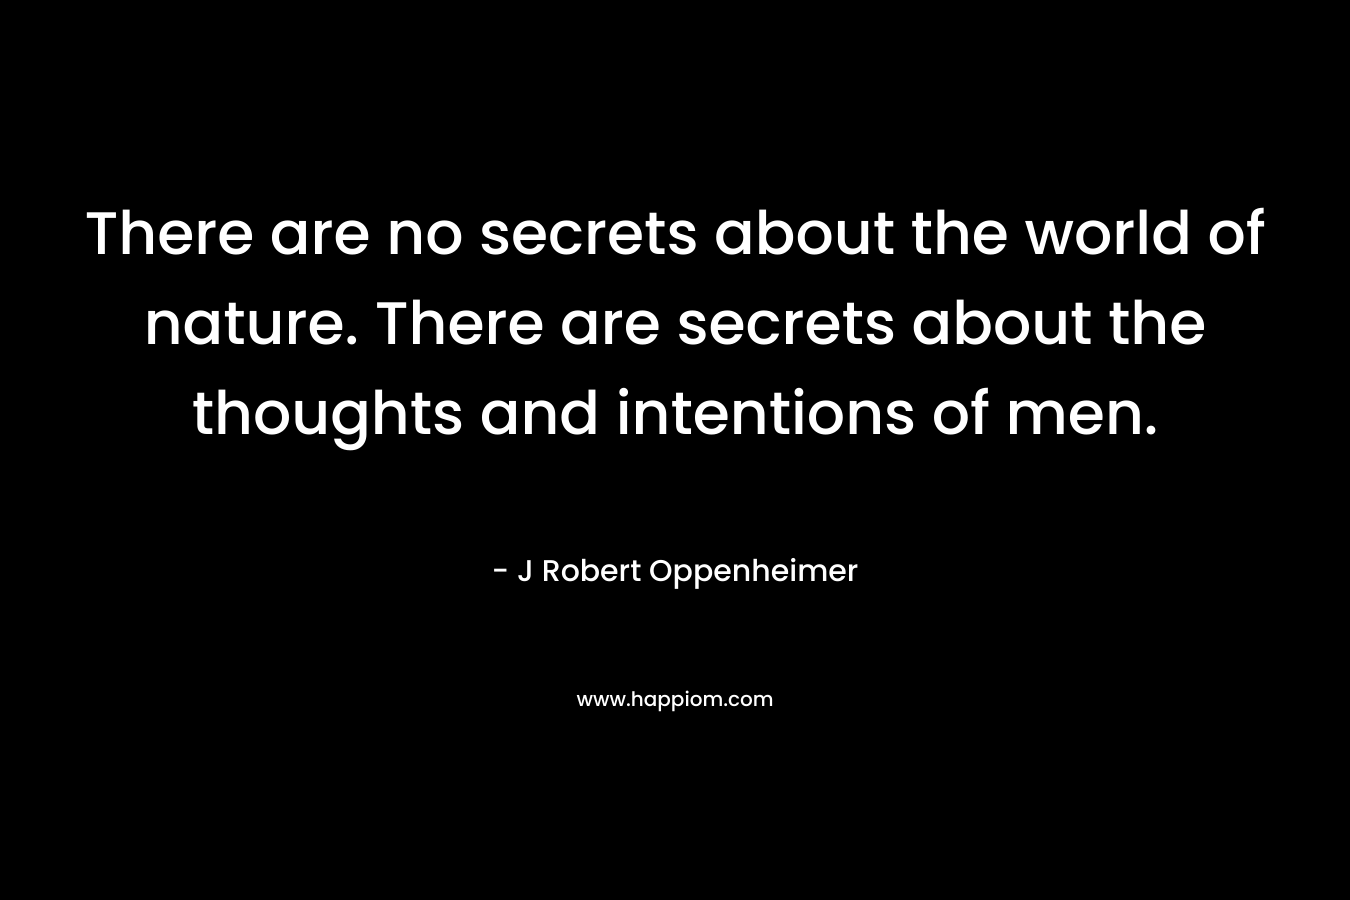 There are no secrets about the world of nature. There are secrets about the thoughts and intentions of men.